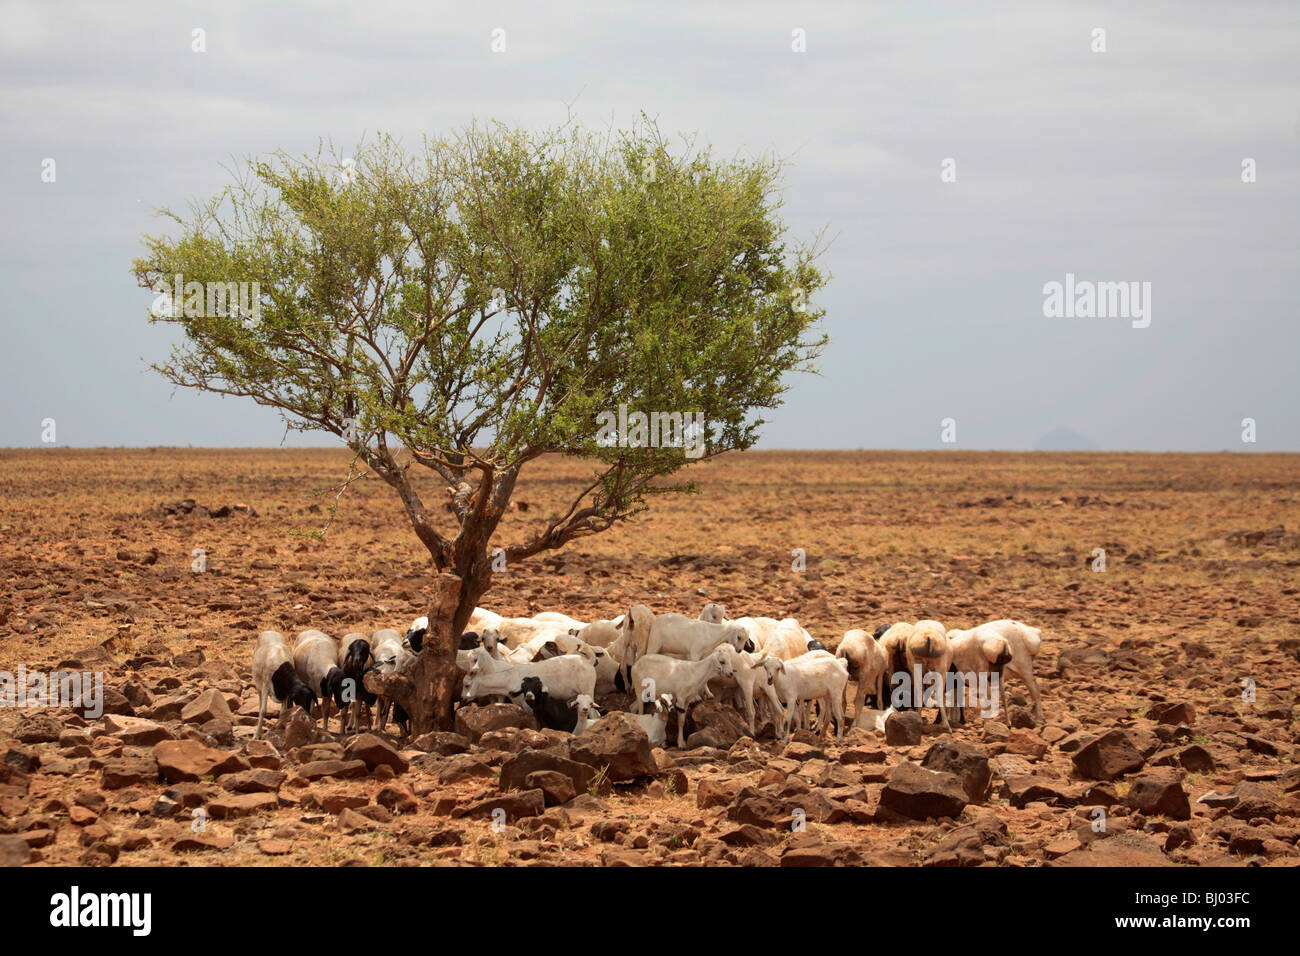 Goats sheltering under a lone tree in the deserts of Northern Kenya between Isiolo and Marsabit Stock Photo